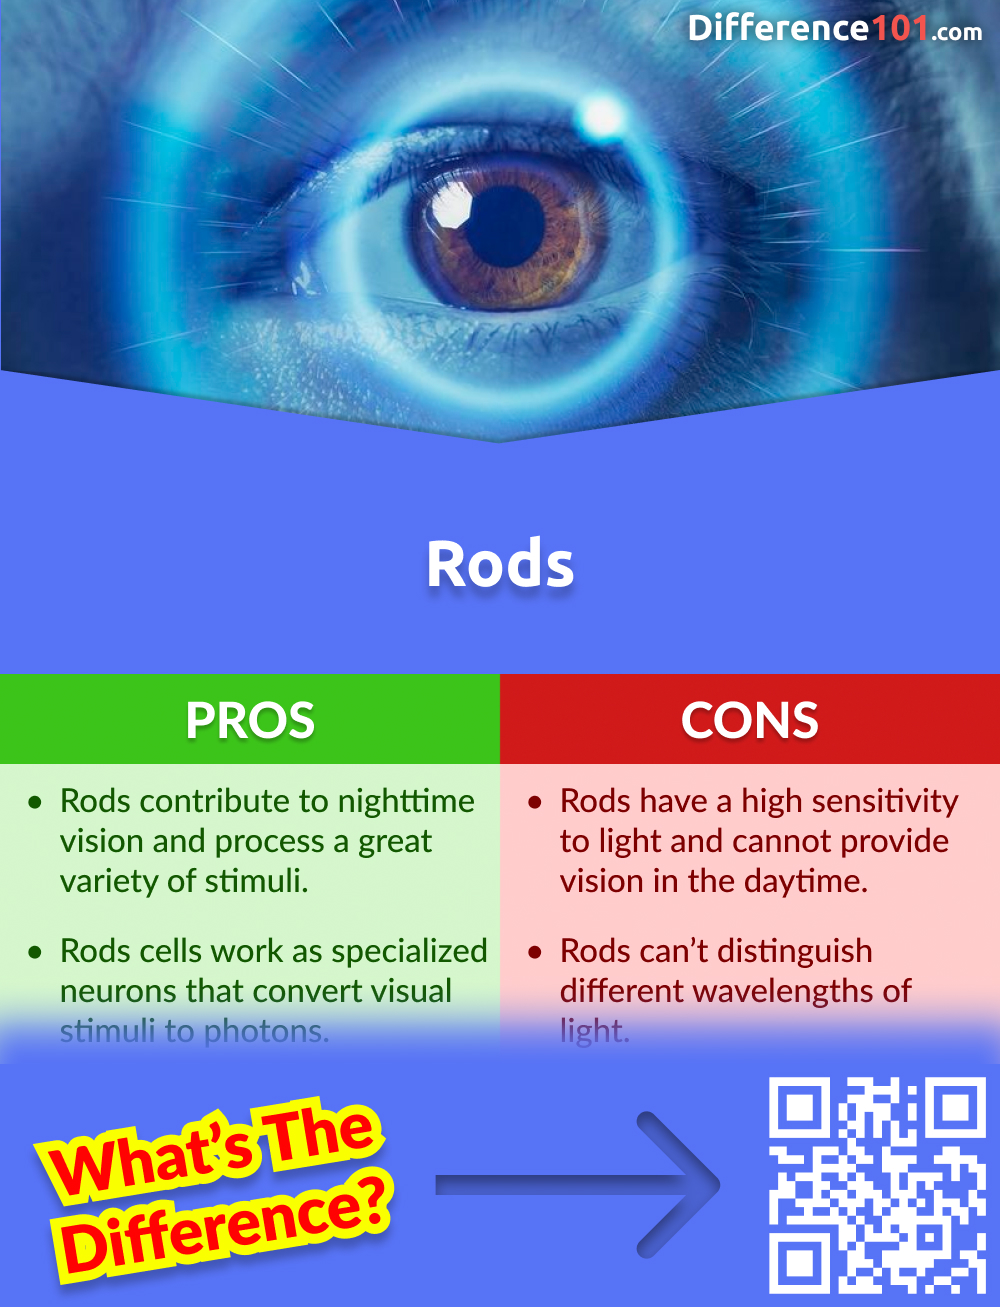 Pros and Cons of Rods